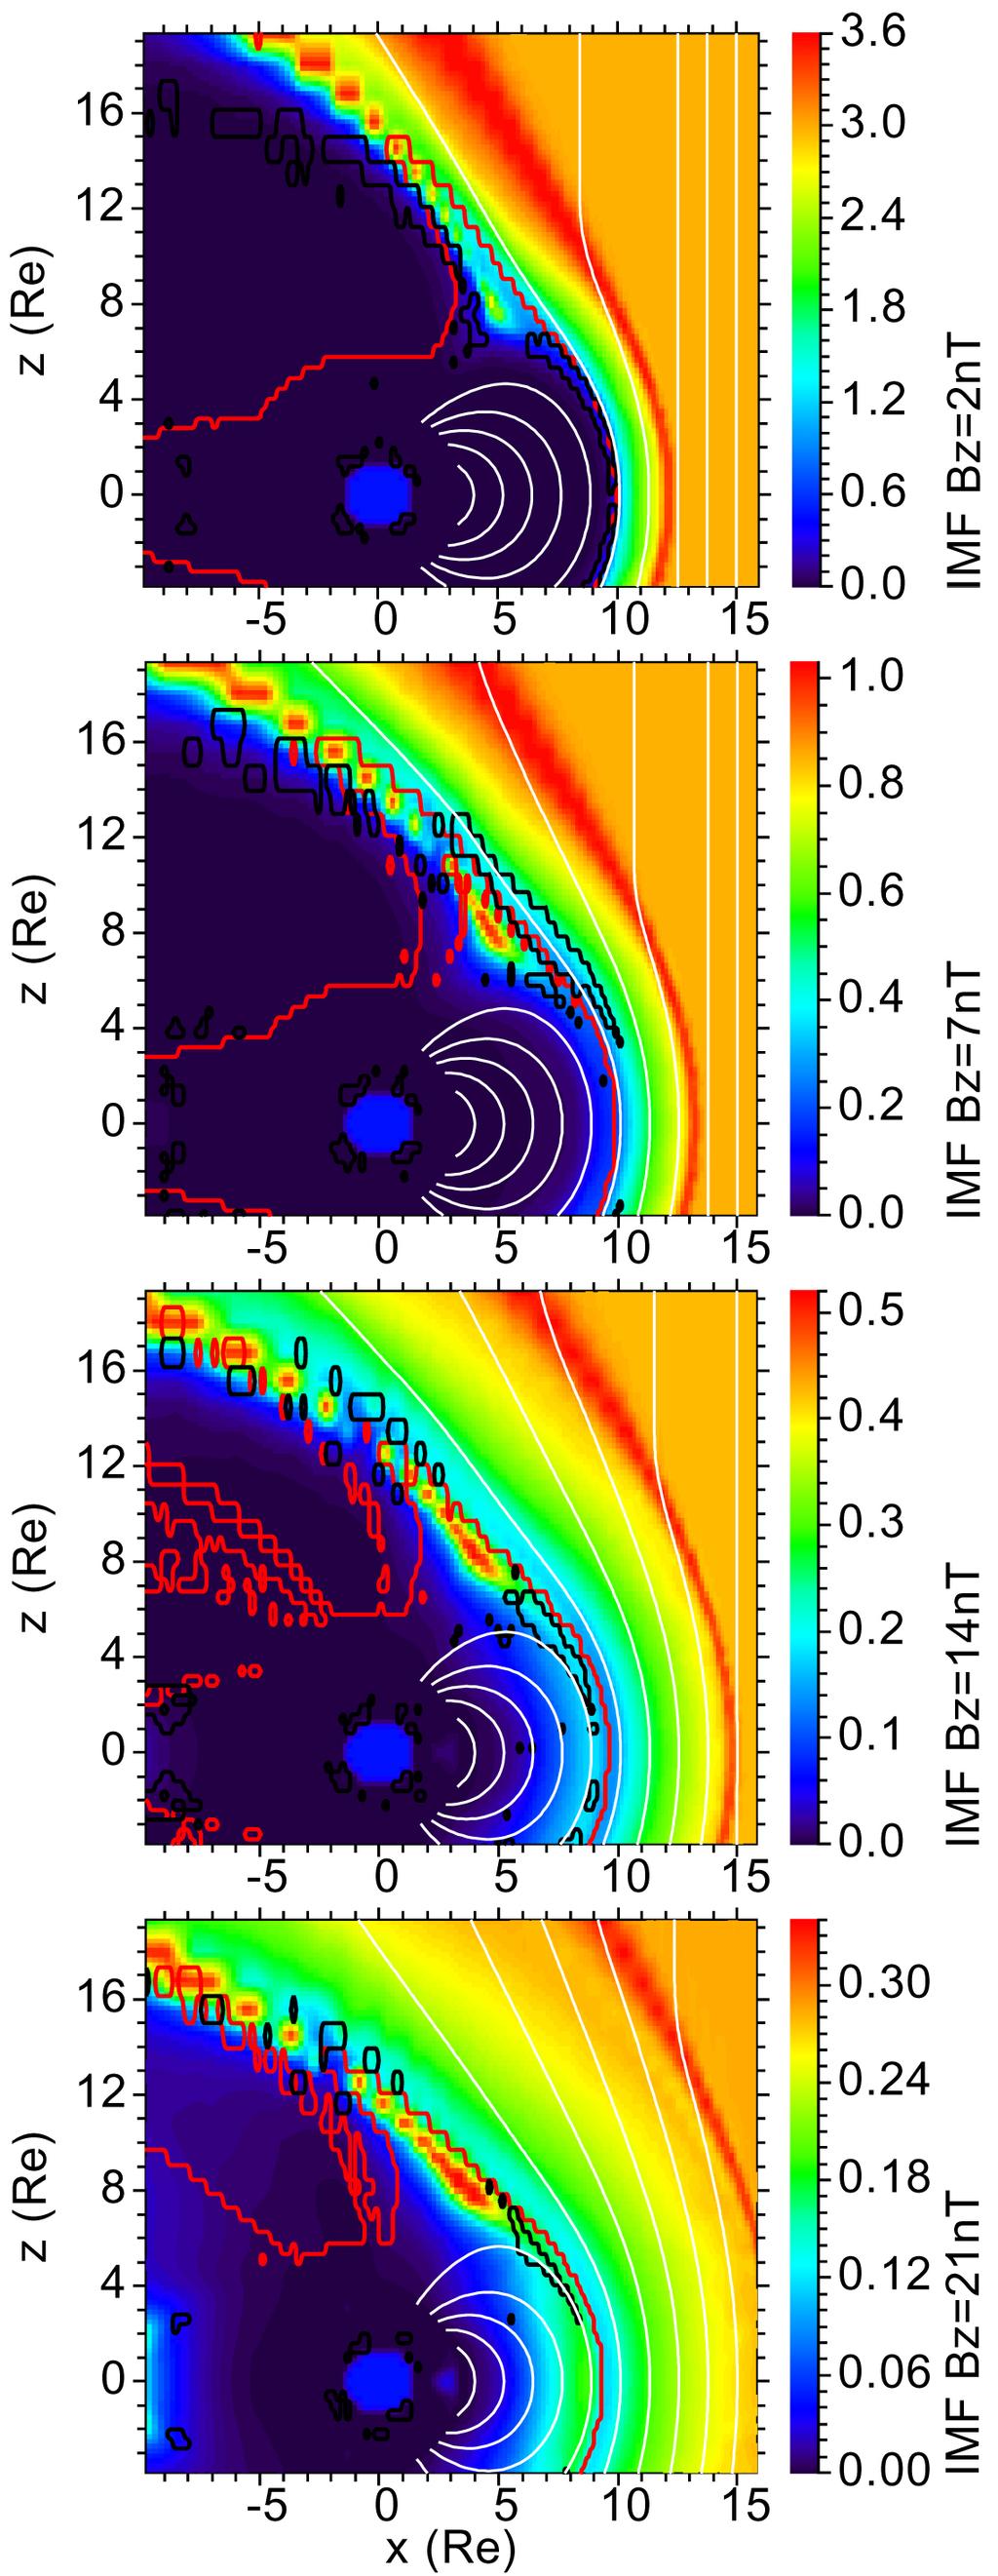 Y. L. Wang et al.: Plasma depletion layer: dependence on solar wind conditions and Earth dipole tilt 279 3.6 3. 2. 1..6-5 5 